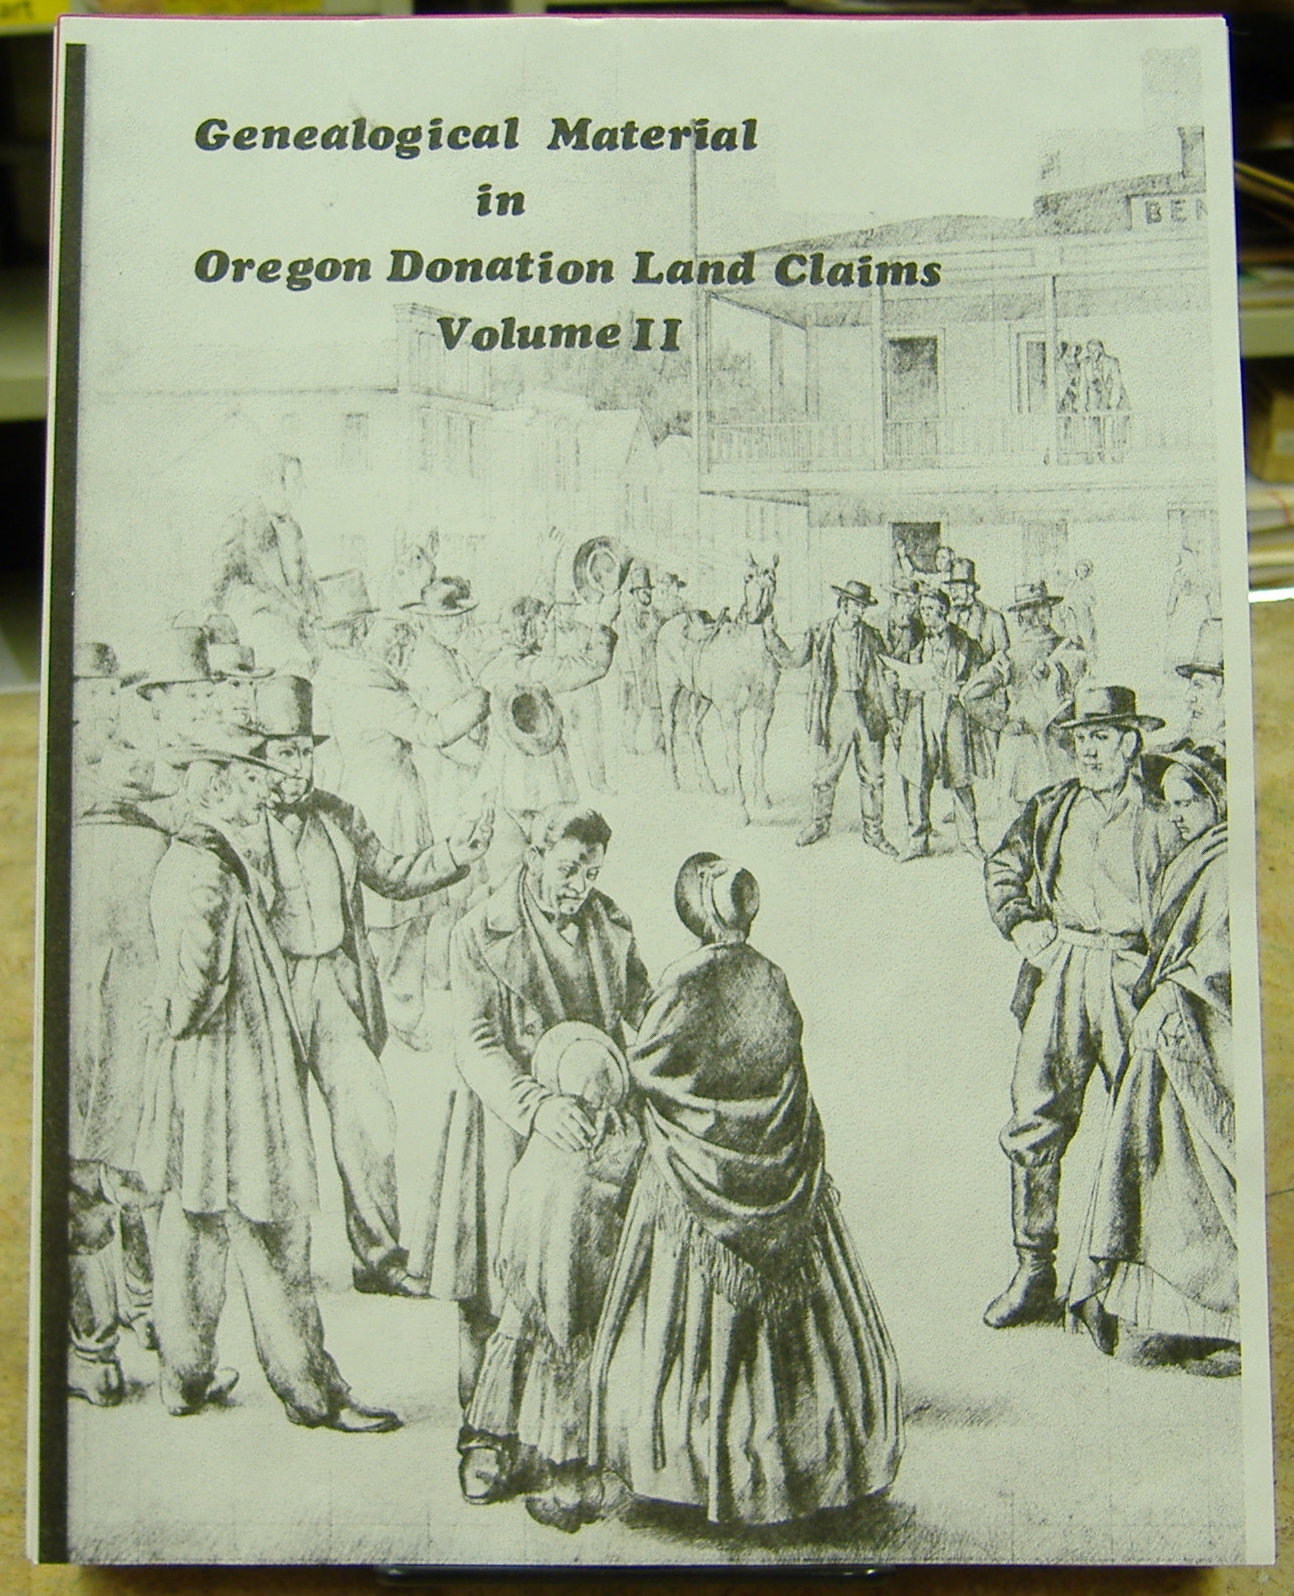 Genealogical Material in Oregon Donation Land Claims Vol II, Claims #2501 - 5289, pp. 197